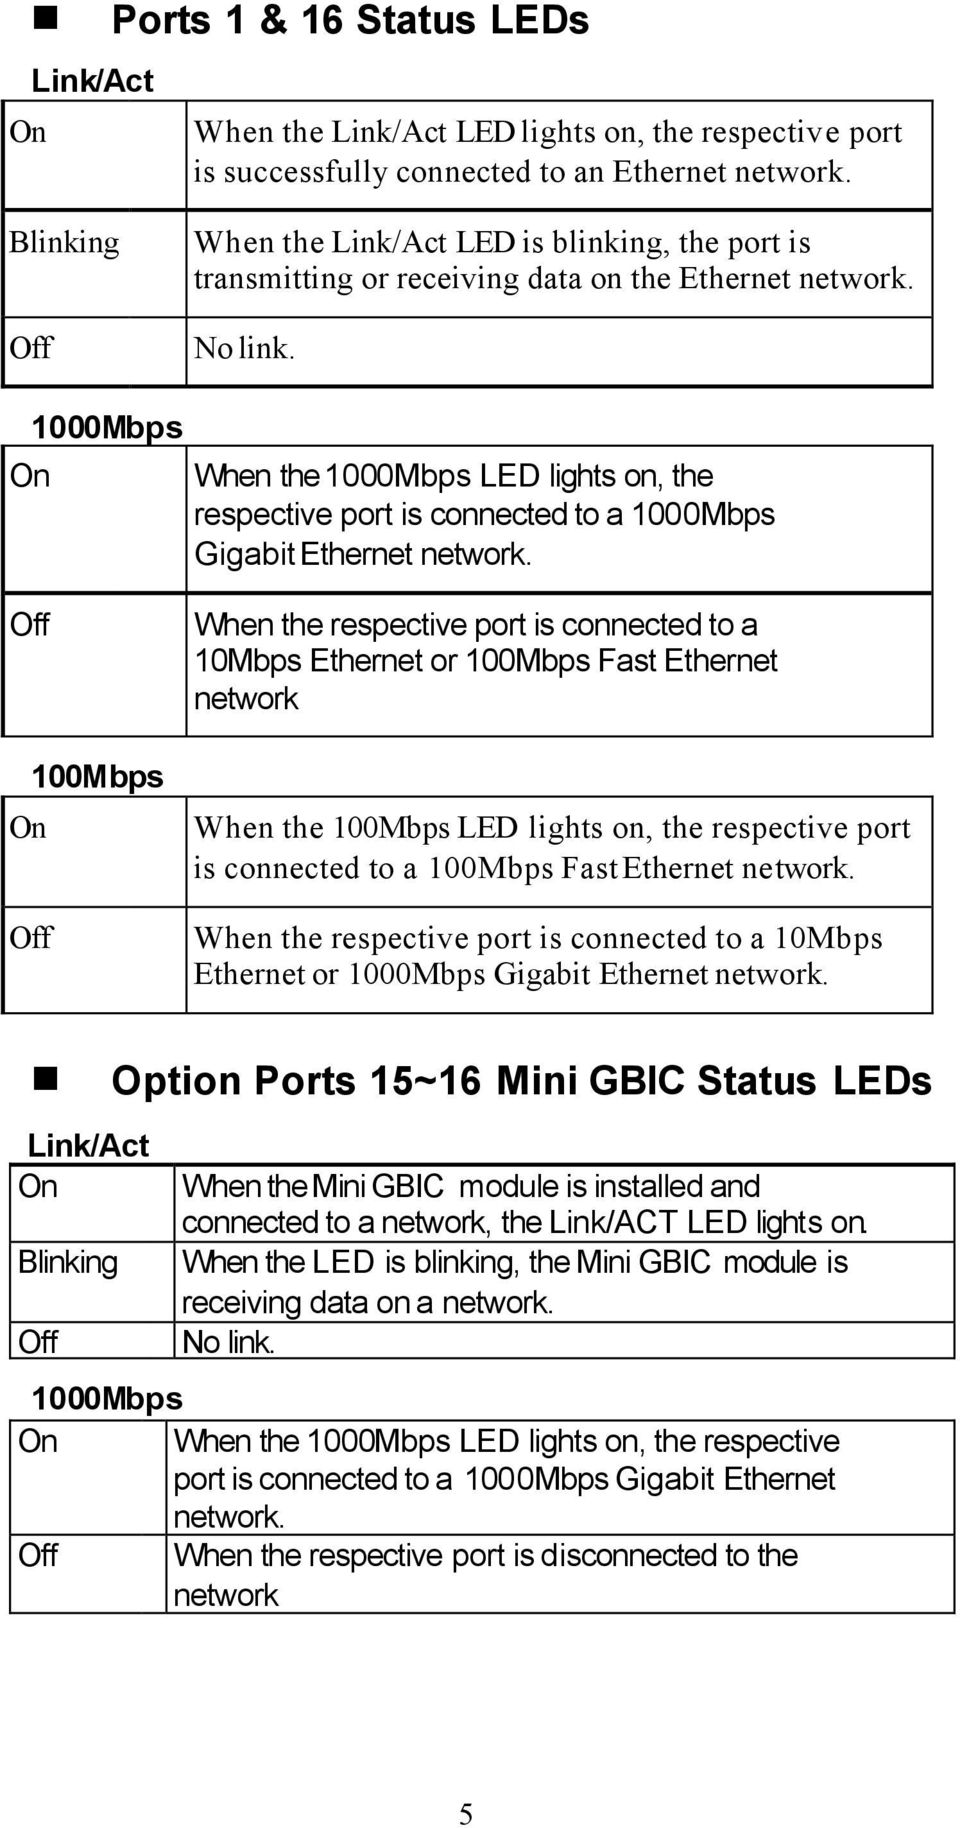 On 1000Mbps When the 1000Mbps LED lights on, the respective port is connected to a 1000Mbps Gigabit Ethernet network.